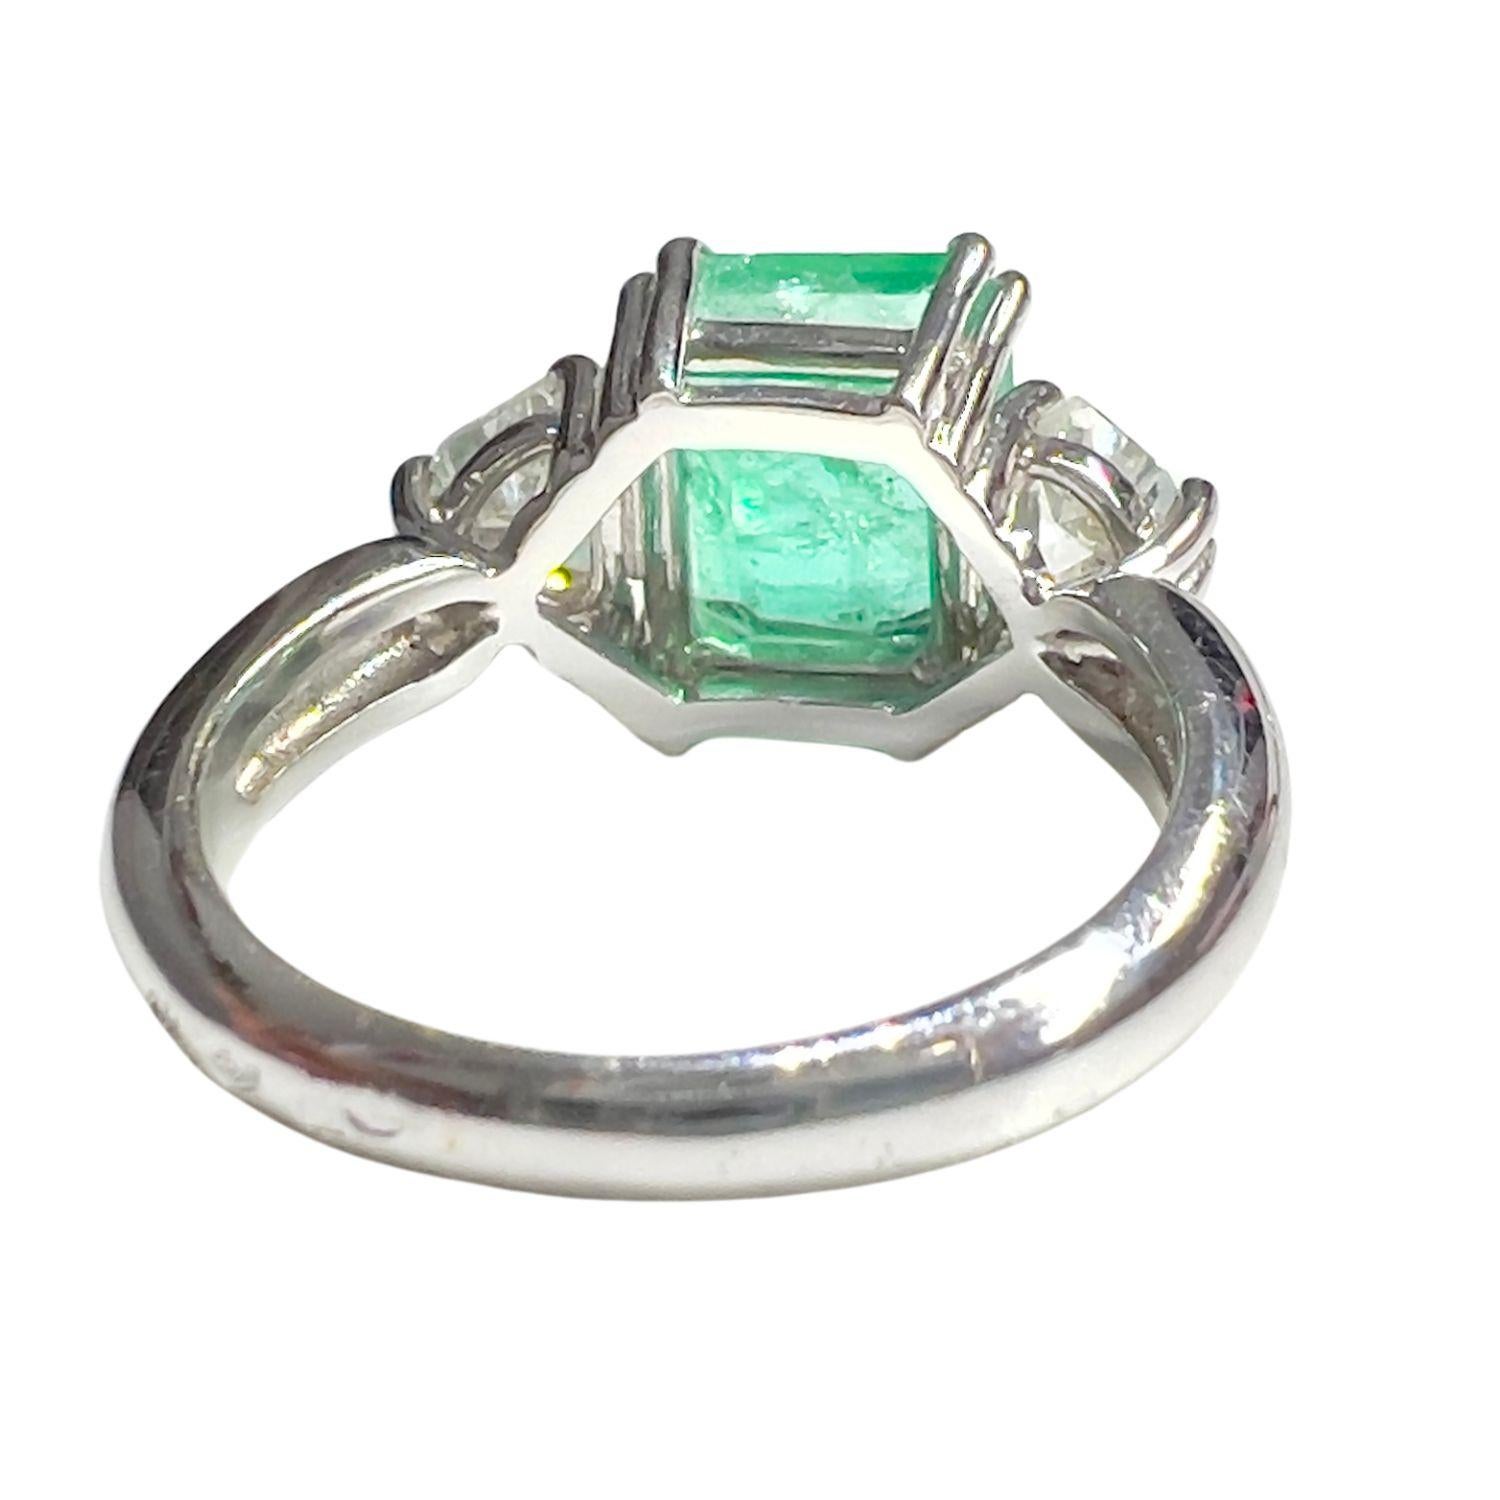 Contemporary ring from the 20th century, crafted in 18k white gold and featuring diamonds and emerald. Weighing 6.04 grams and sized at 13/53, this ring exudes modern elegance. 
The centerpiece boasts an emerald cut AA+ emerald measuring 9.3 x 8 x